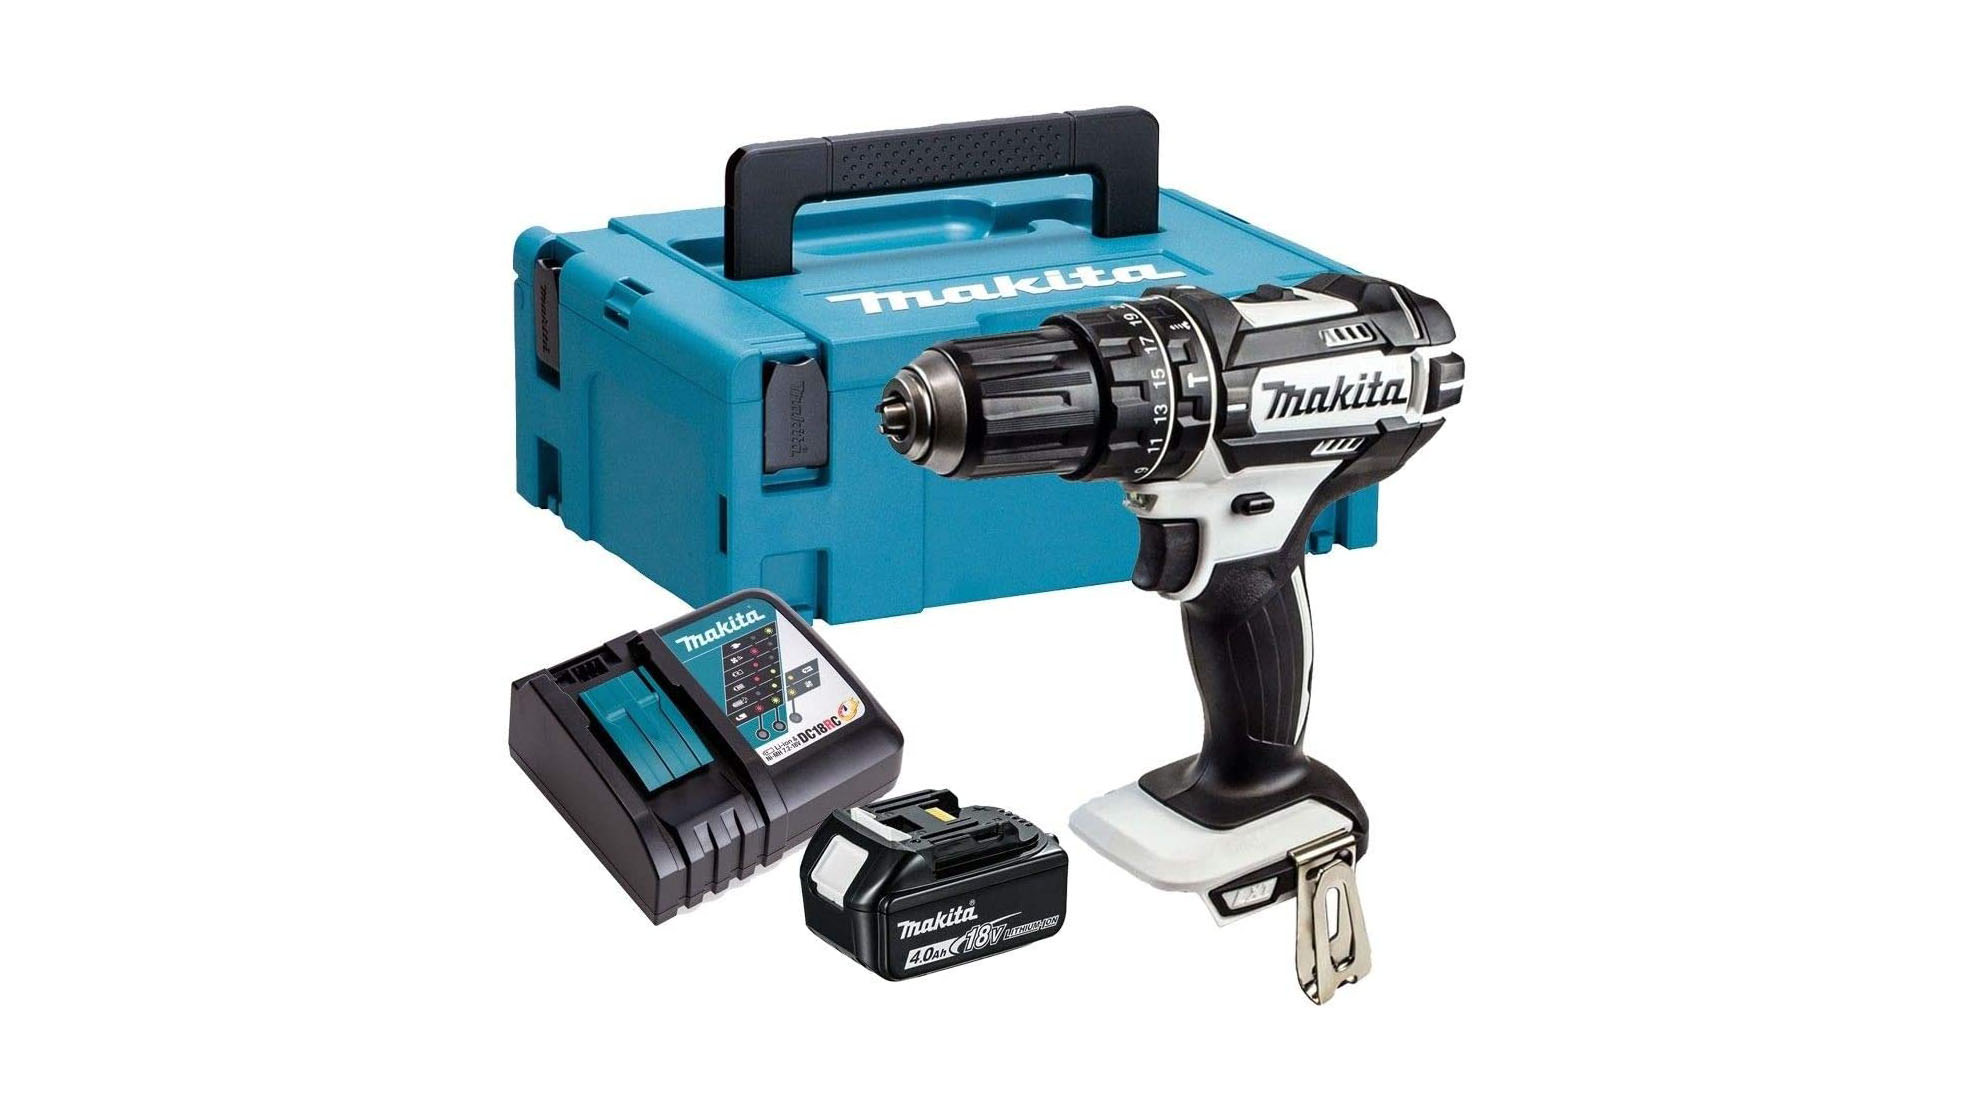 DHP482M1JW Cordless Drill Review |